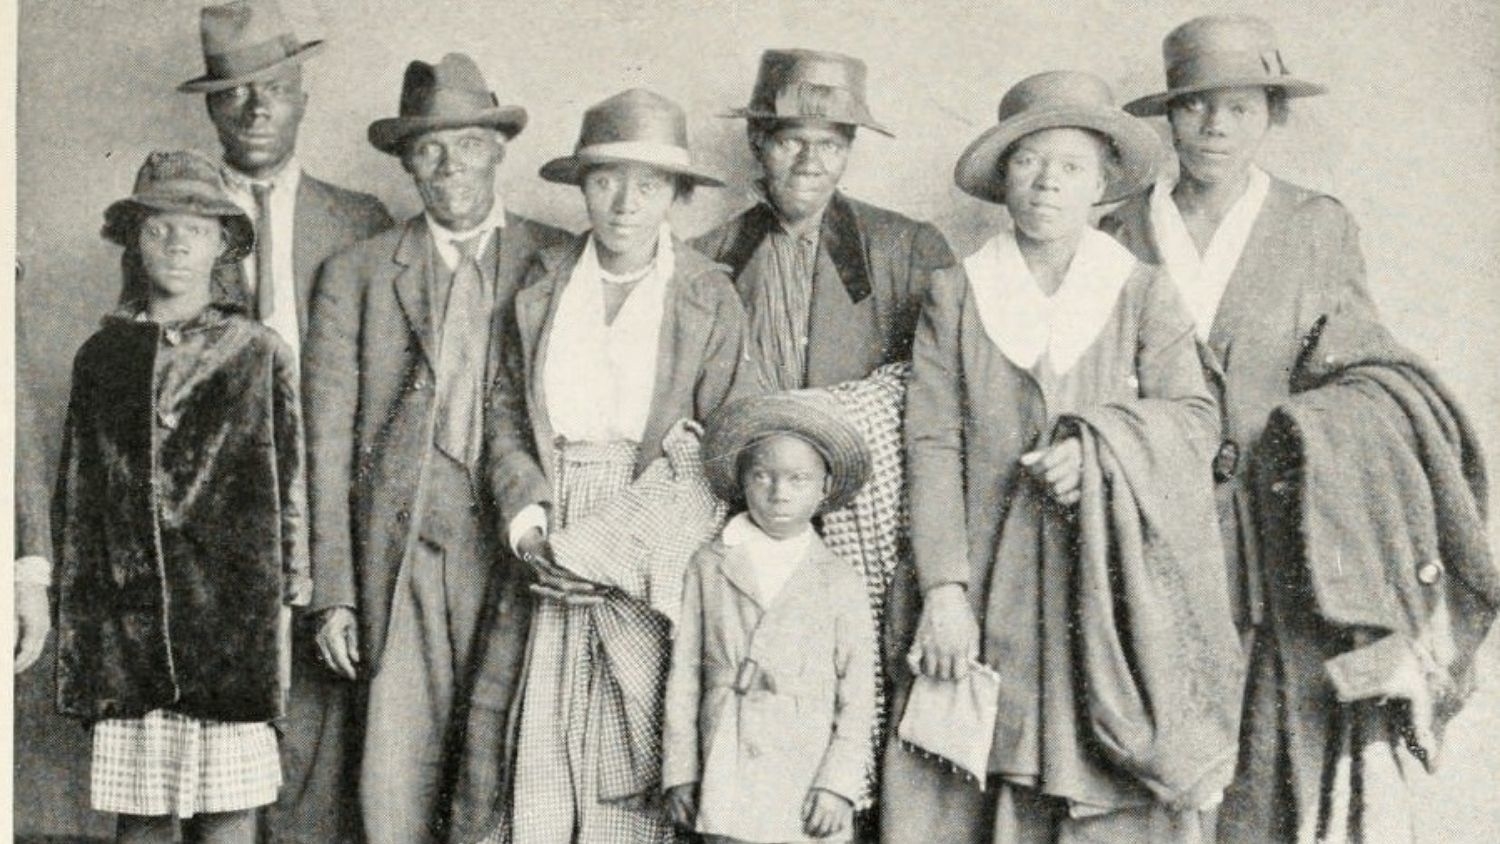 The Arthur family arrives in Chicago - Study Spotlights Black Social Reformer, Parks and Rec Pioneer, On Chicago's South Side - Parks, Recreation and Tourism Management at NC State University